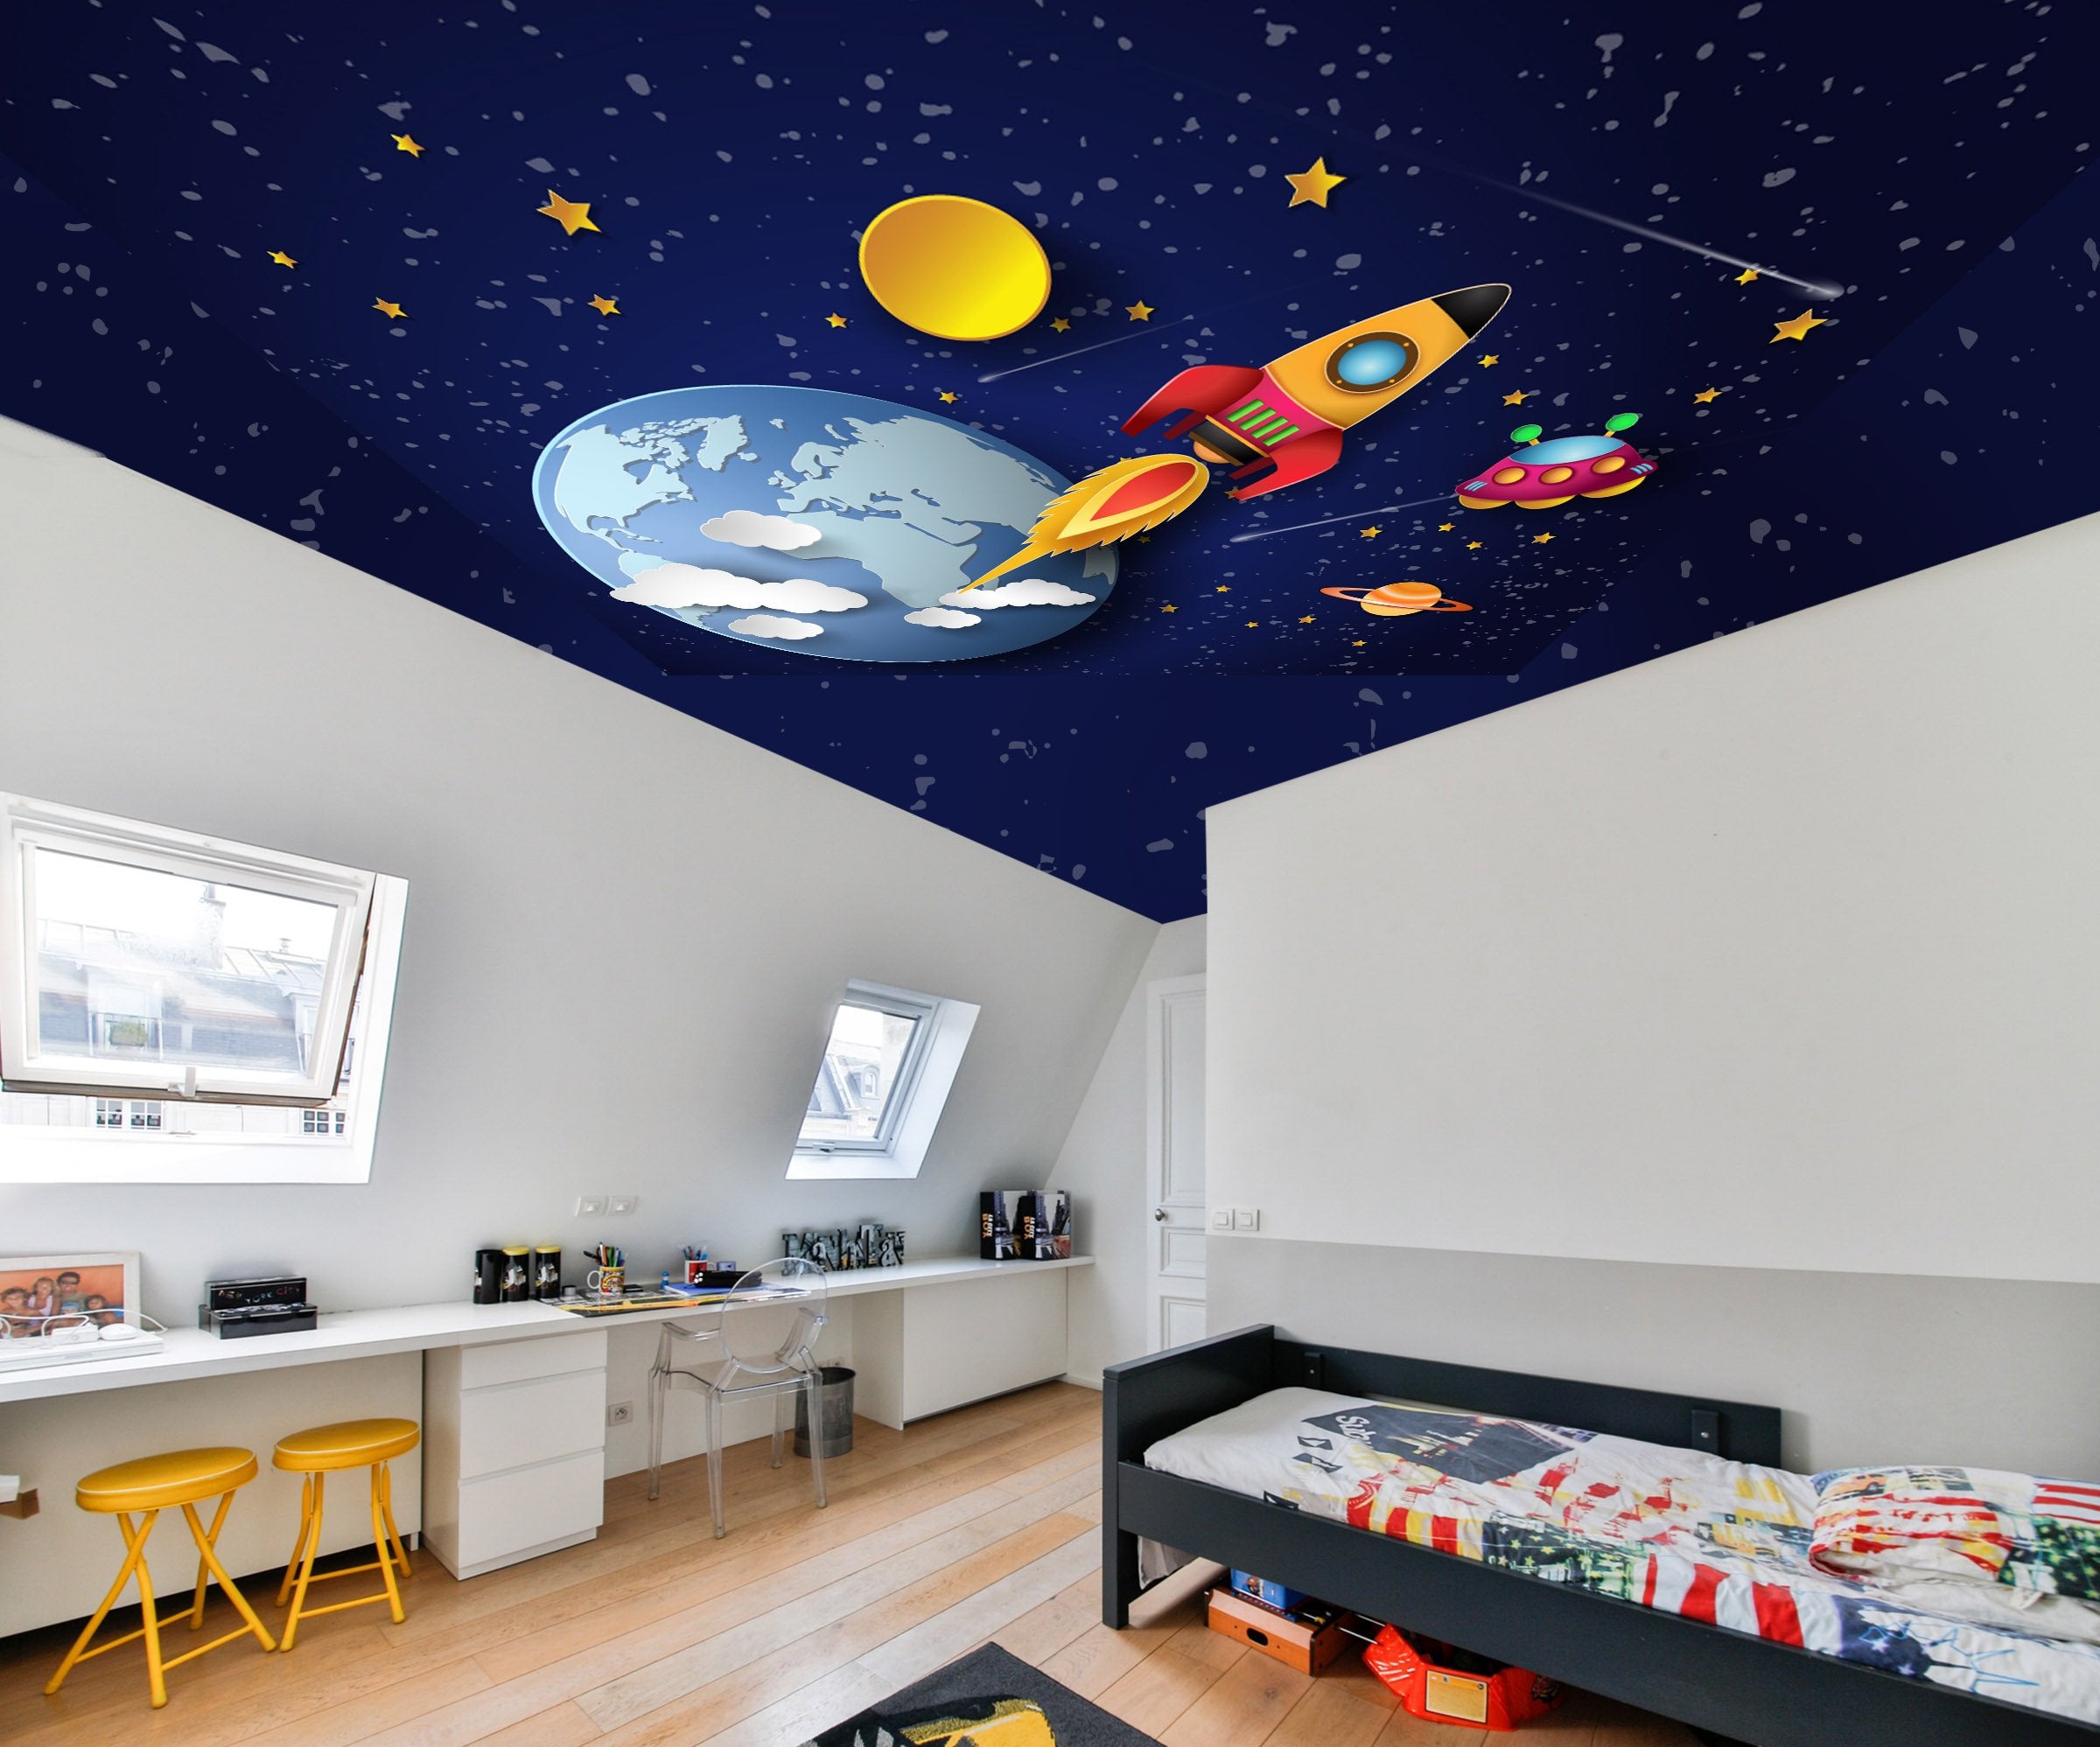 Sky and Space Theme Wallpaper for walls and ceilings, Blue